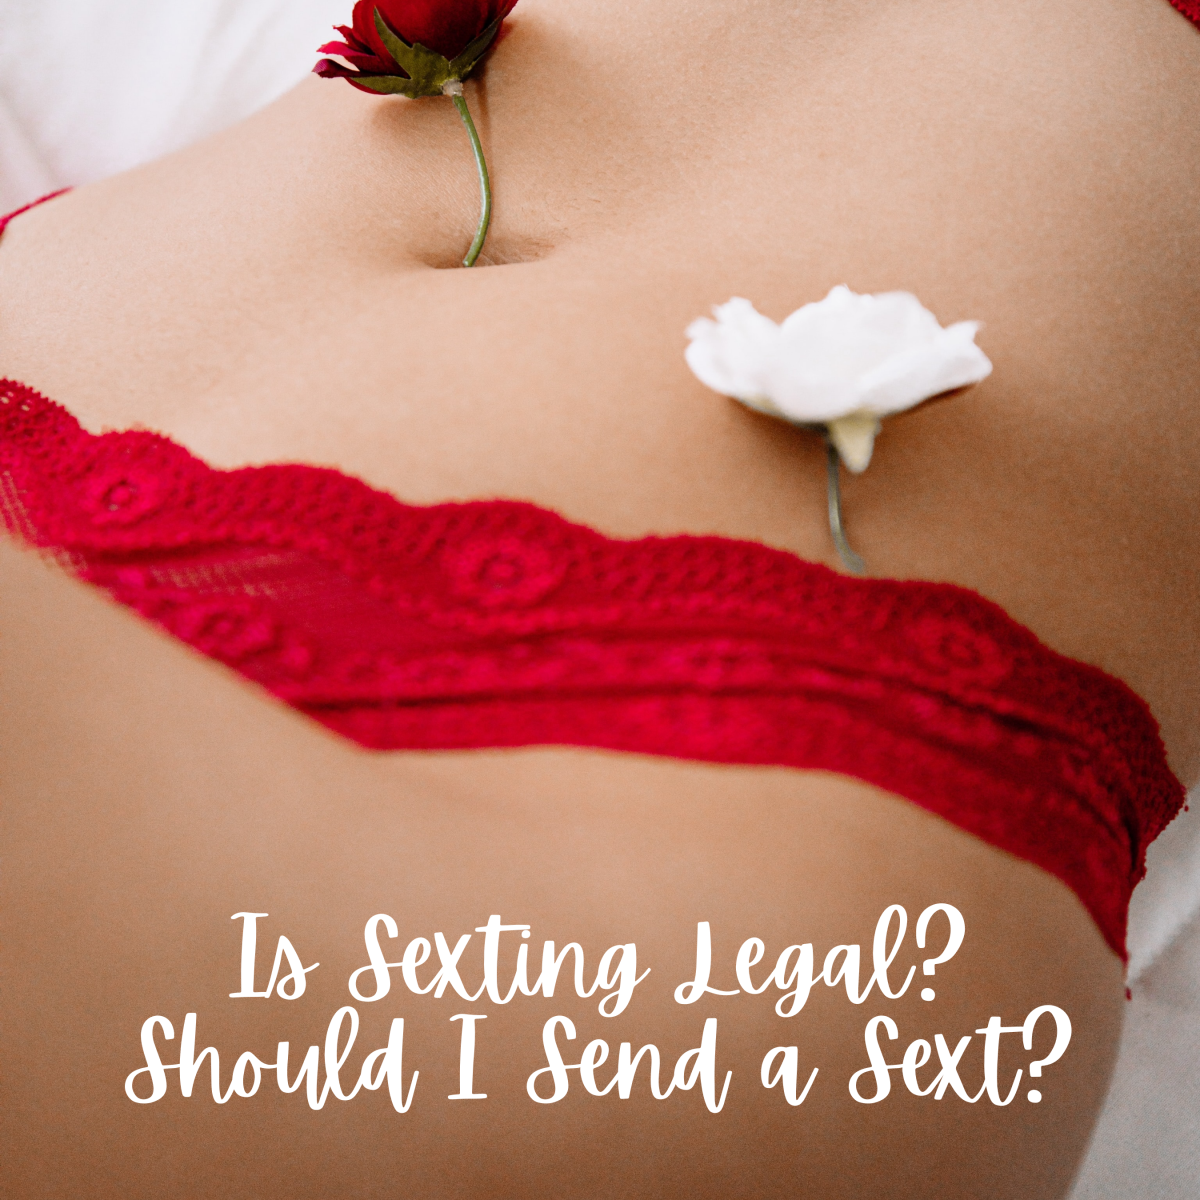 Is sexting illegal, and should you send a sext?